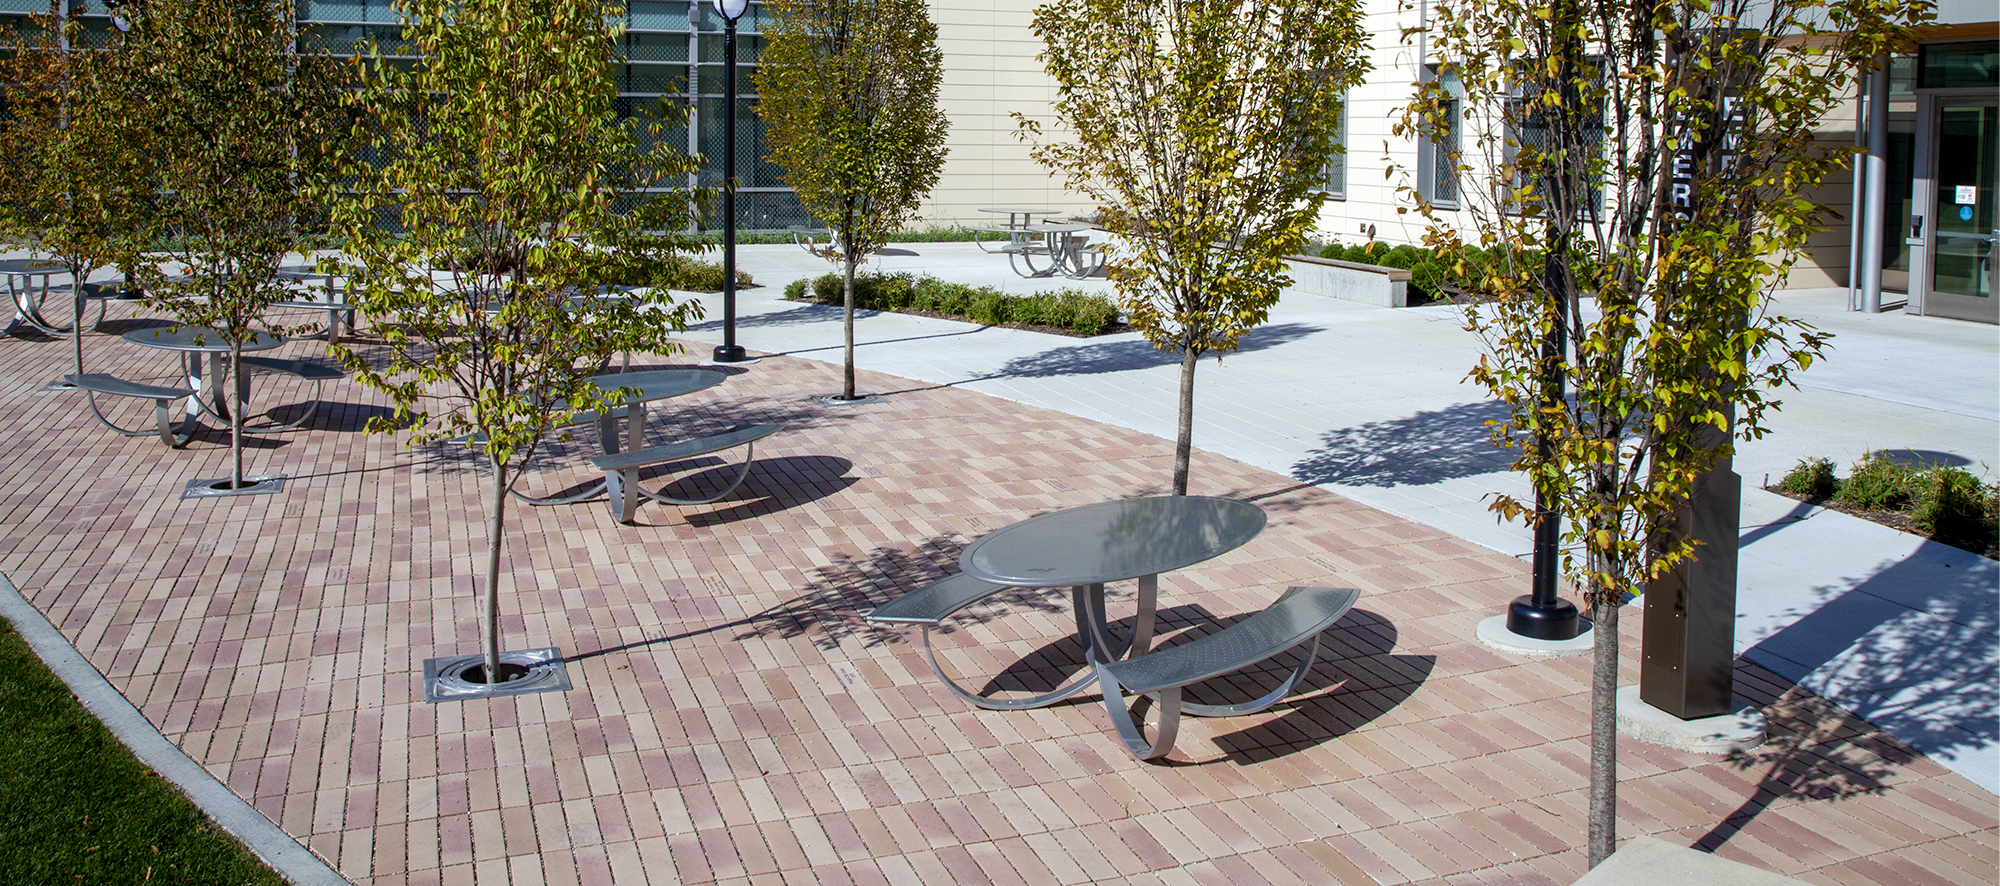 Promenade Plank pavers in a reddish-brown hue delineate a relaxing outdoor eating space, shaded by surrounding trees.